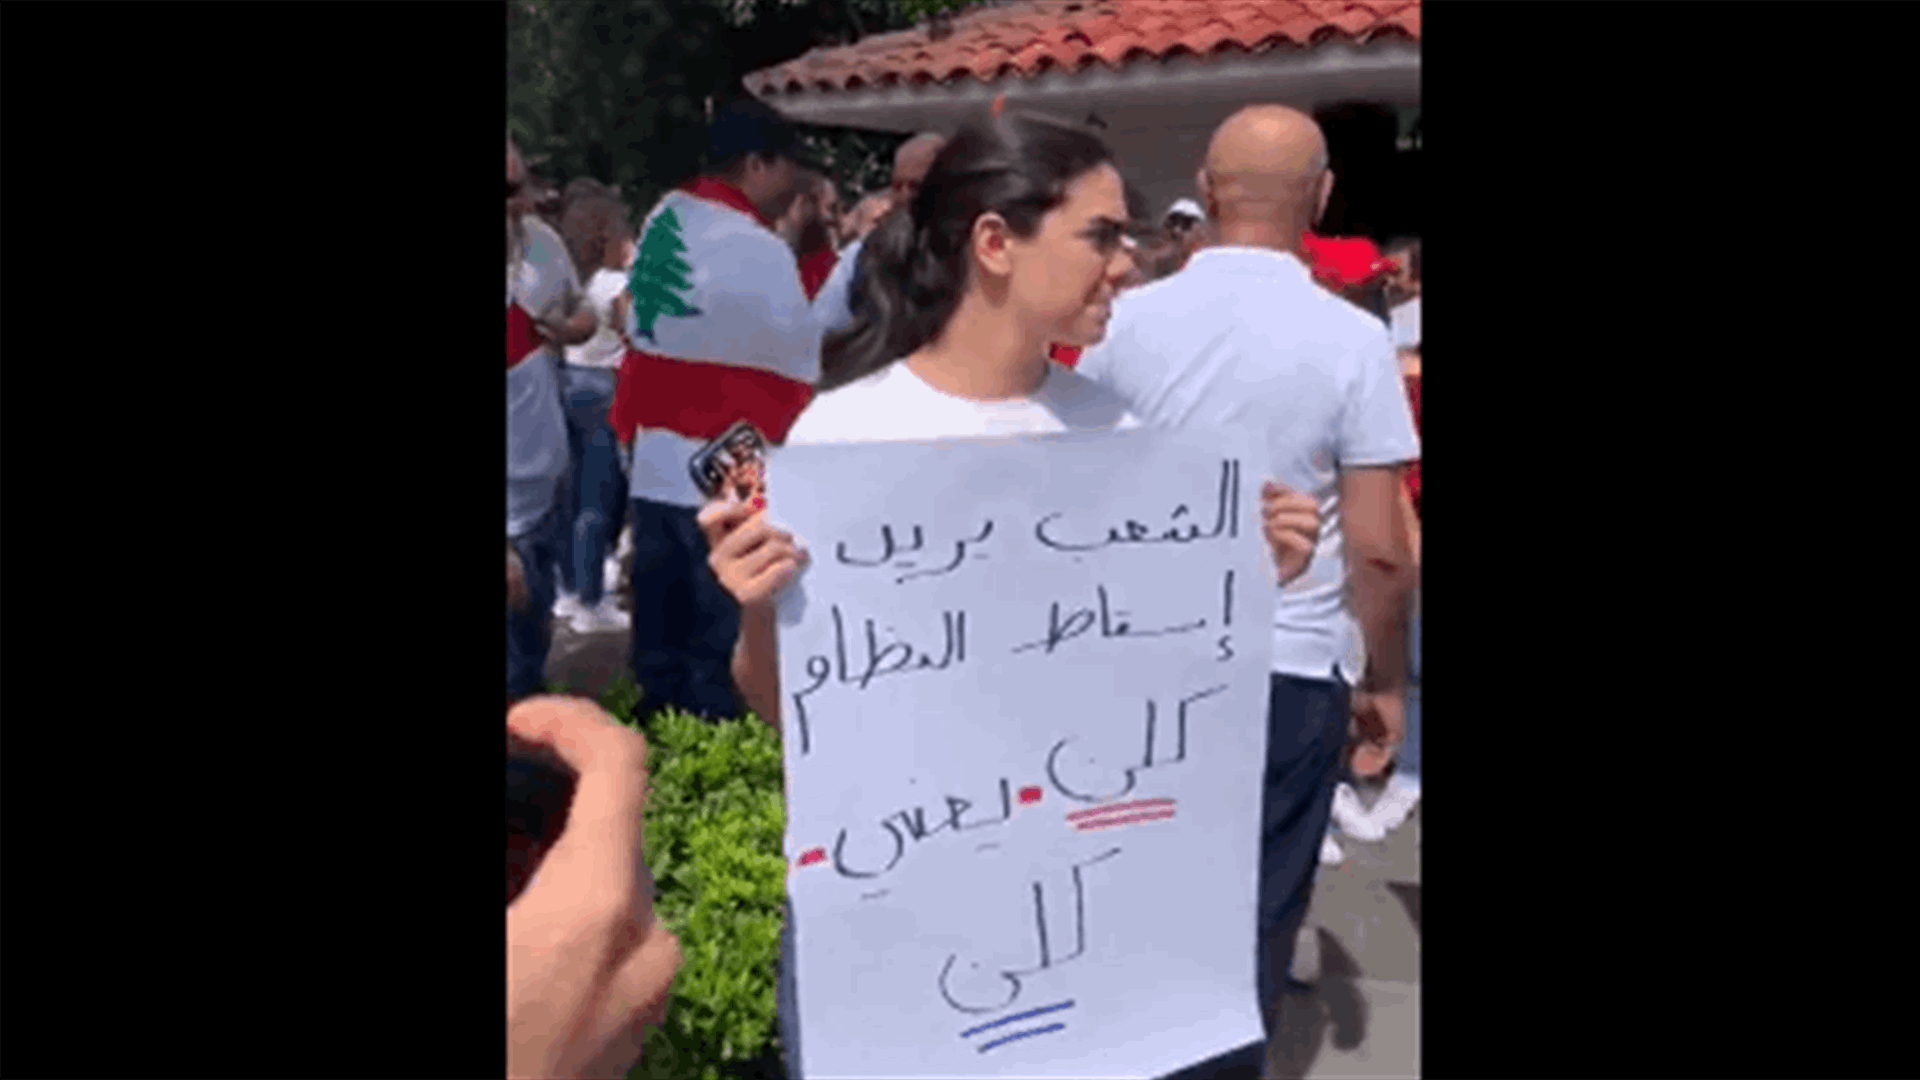 Lebanese expats in Mexico stand in solidarity with Lebanon’s revolution (Video)